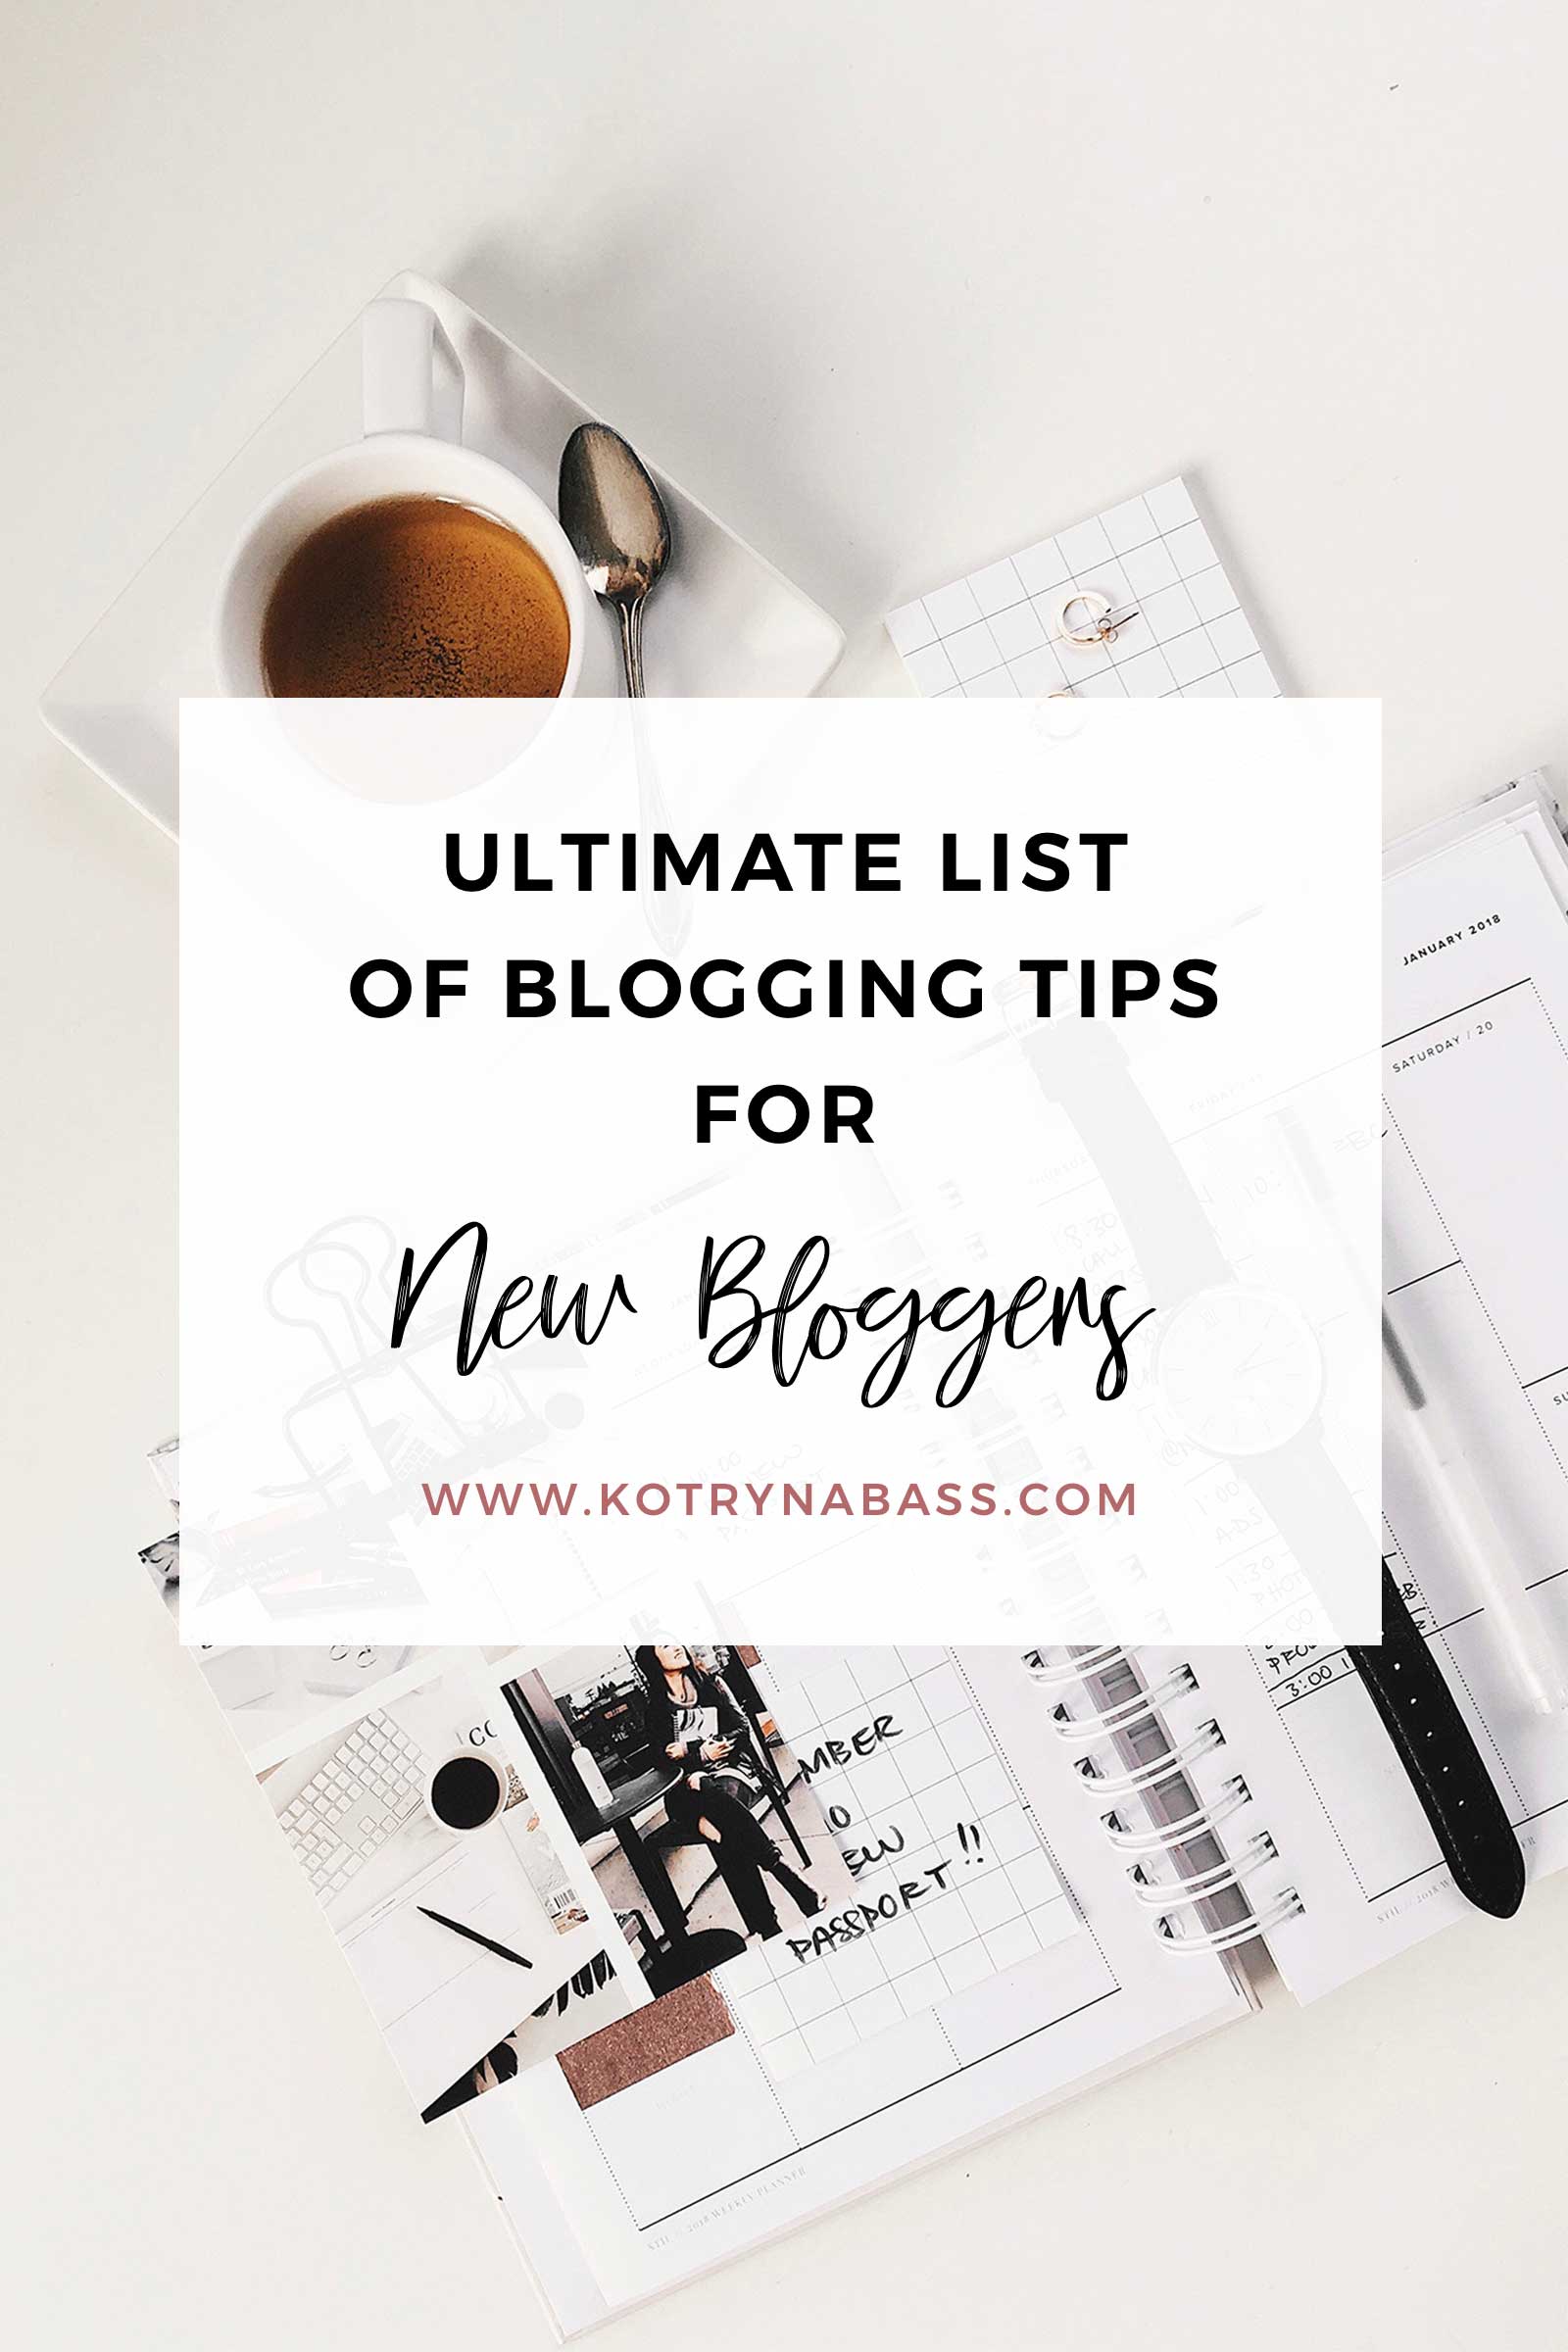 Are you planning to start a blog? This ultimate list of blogging tips for beginners will show you all the do's and dont's about creating your very first blog and actually turning it into a success. Let's get to work then!